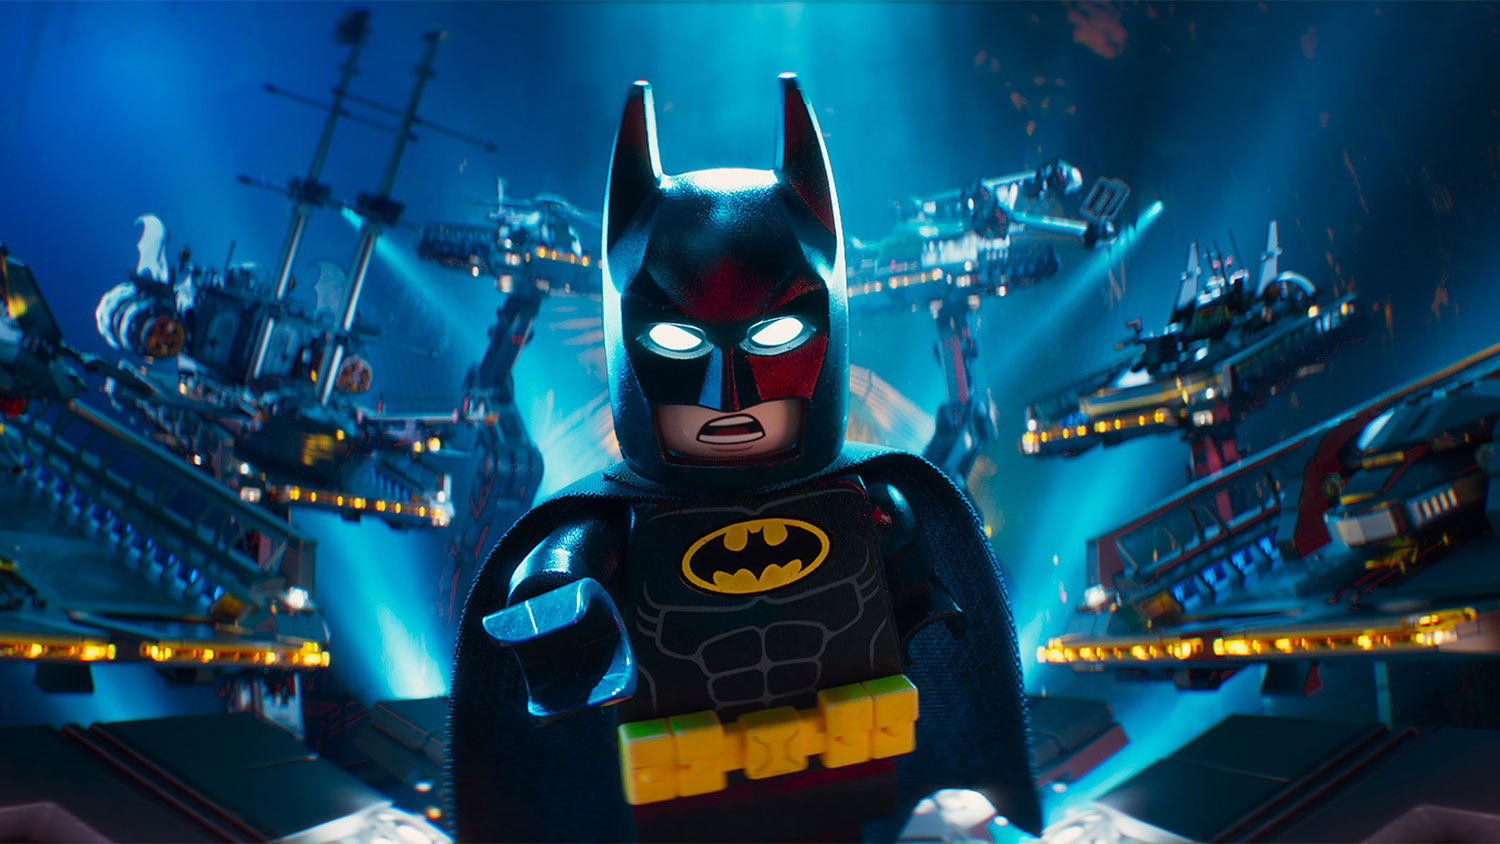 Batman points to the camera in The Lego Batman Movie.